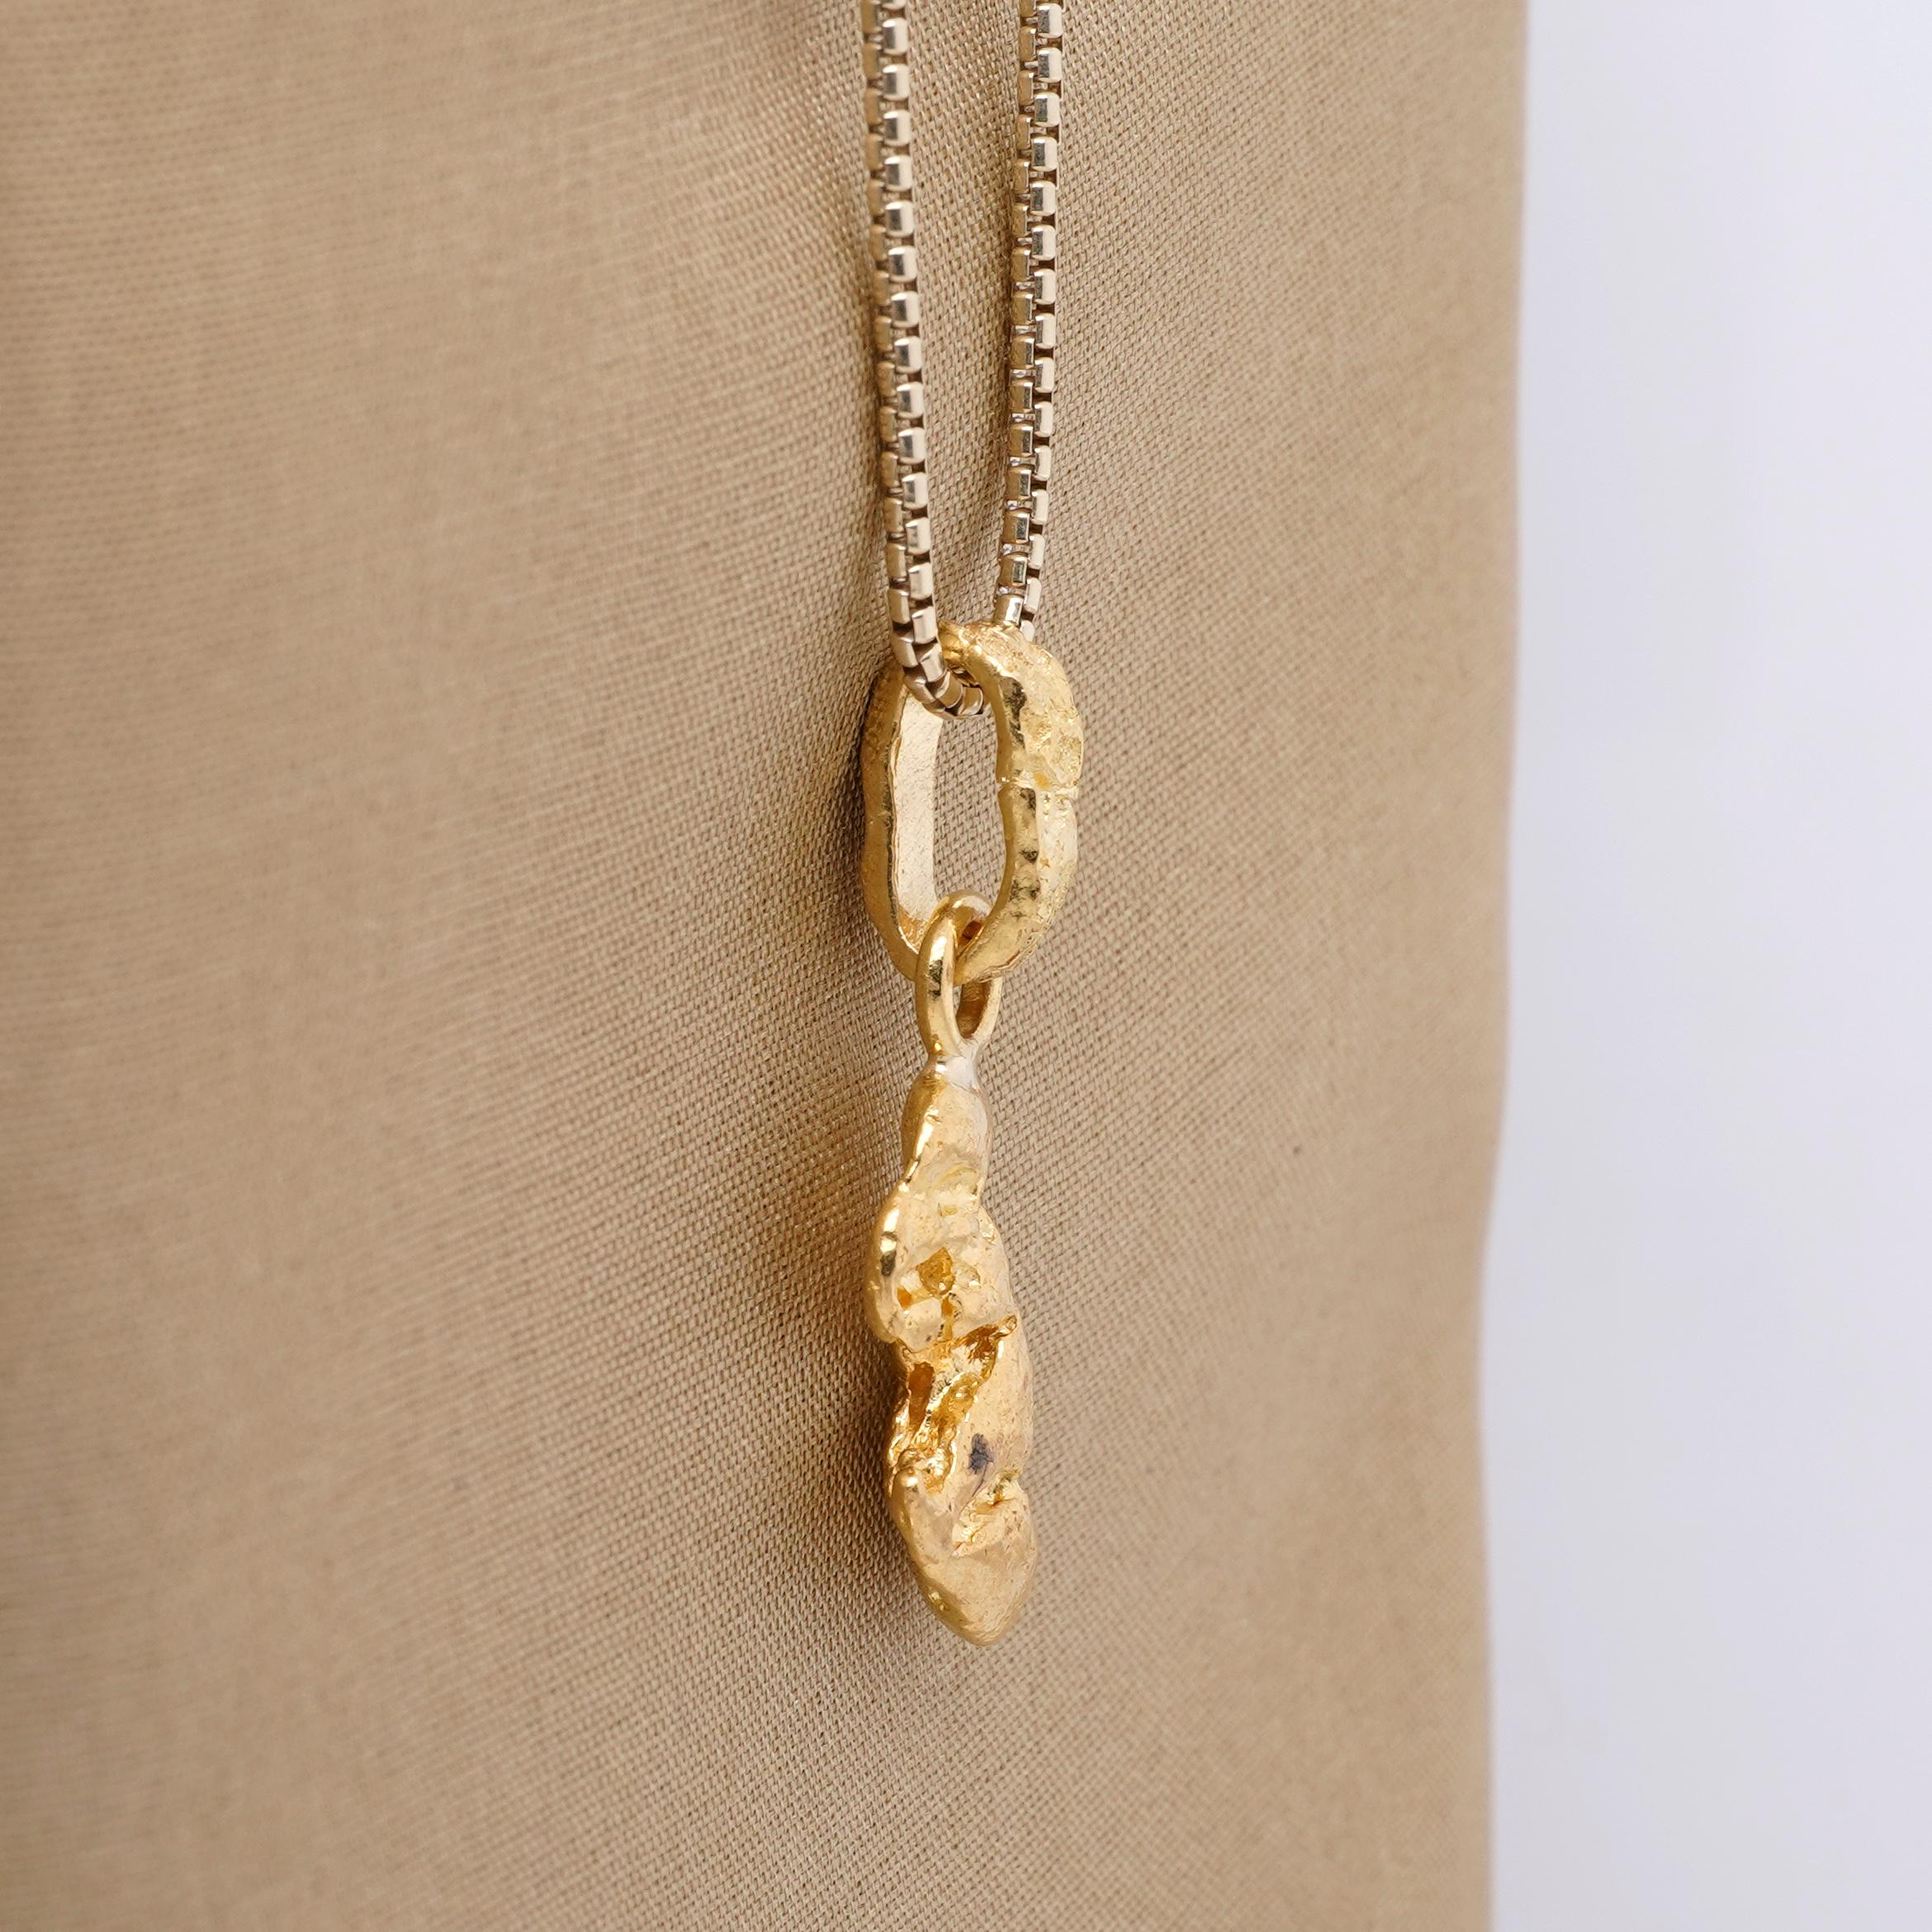 Baroque Raw, Solid, 24k Yellow Golden Nugget Pendant, 4.2 Grams from Australia For Sale